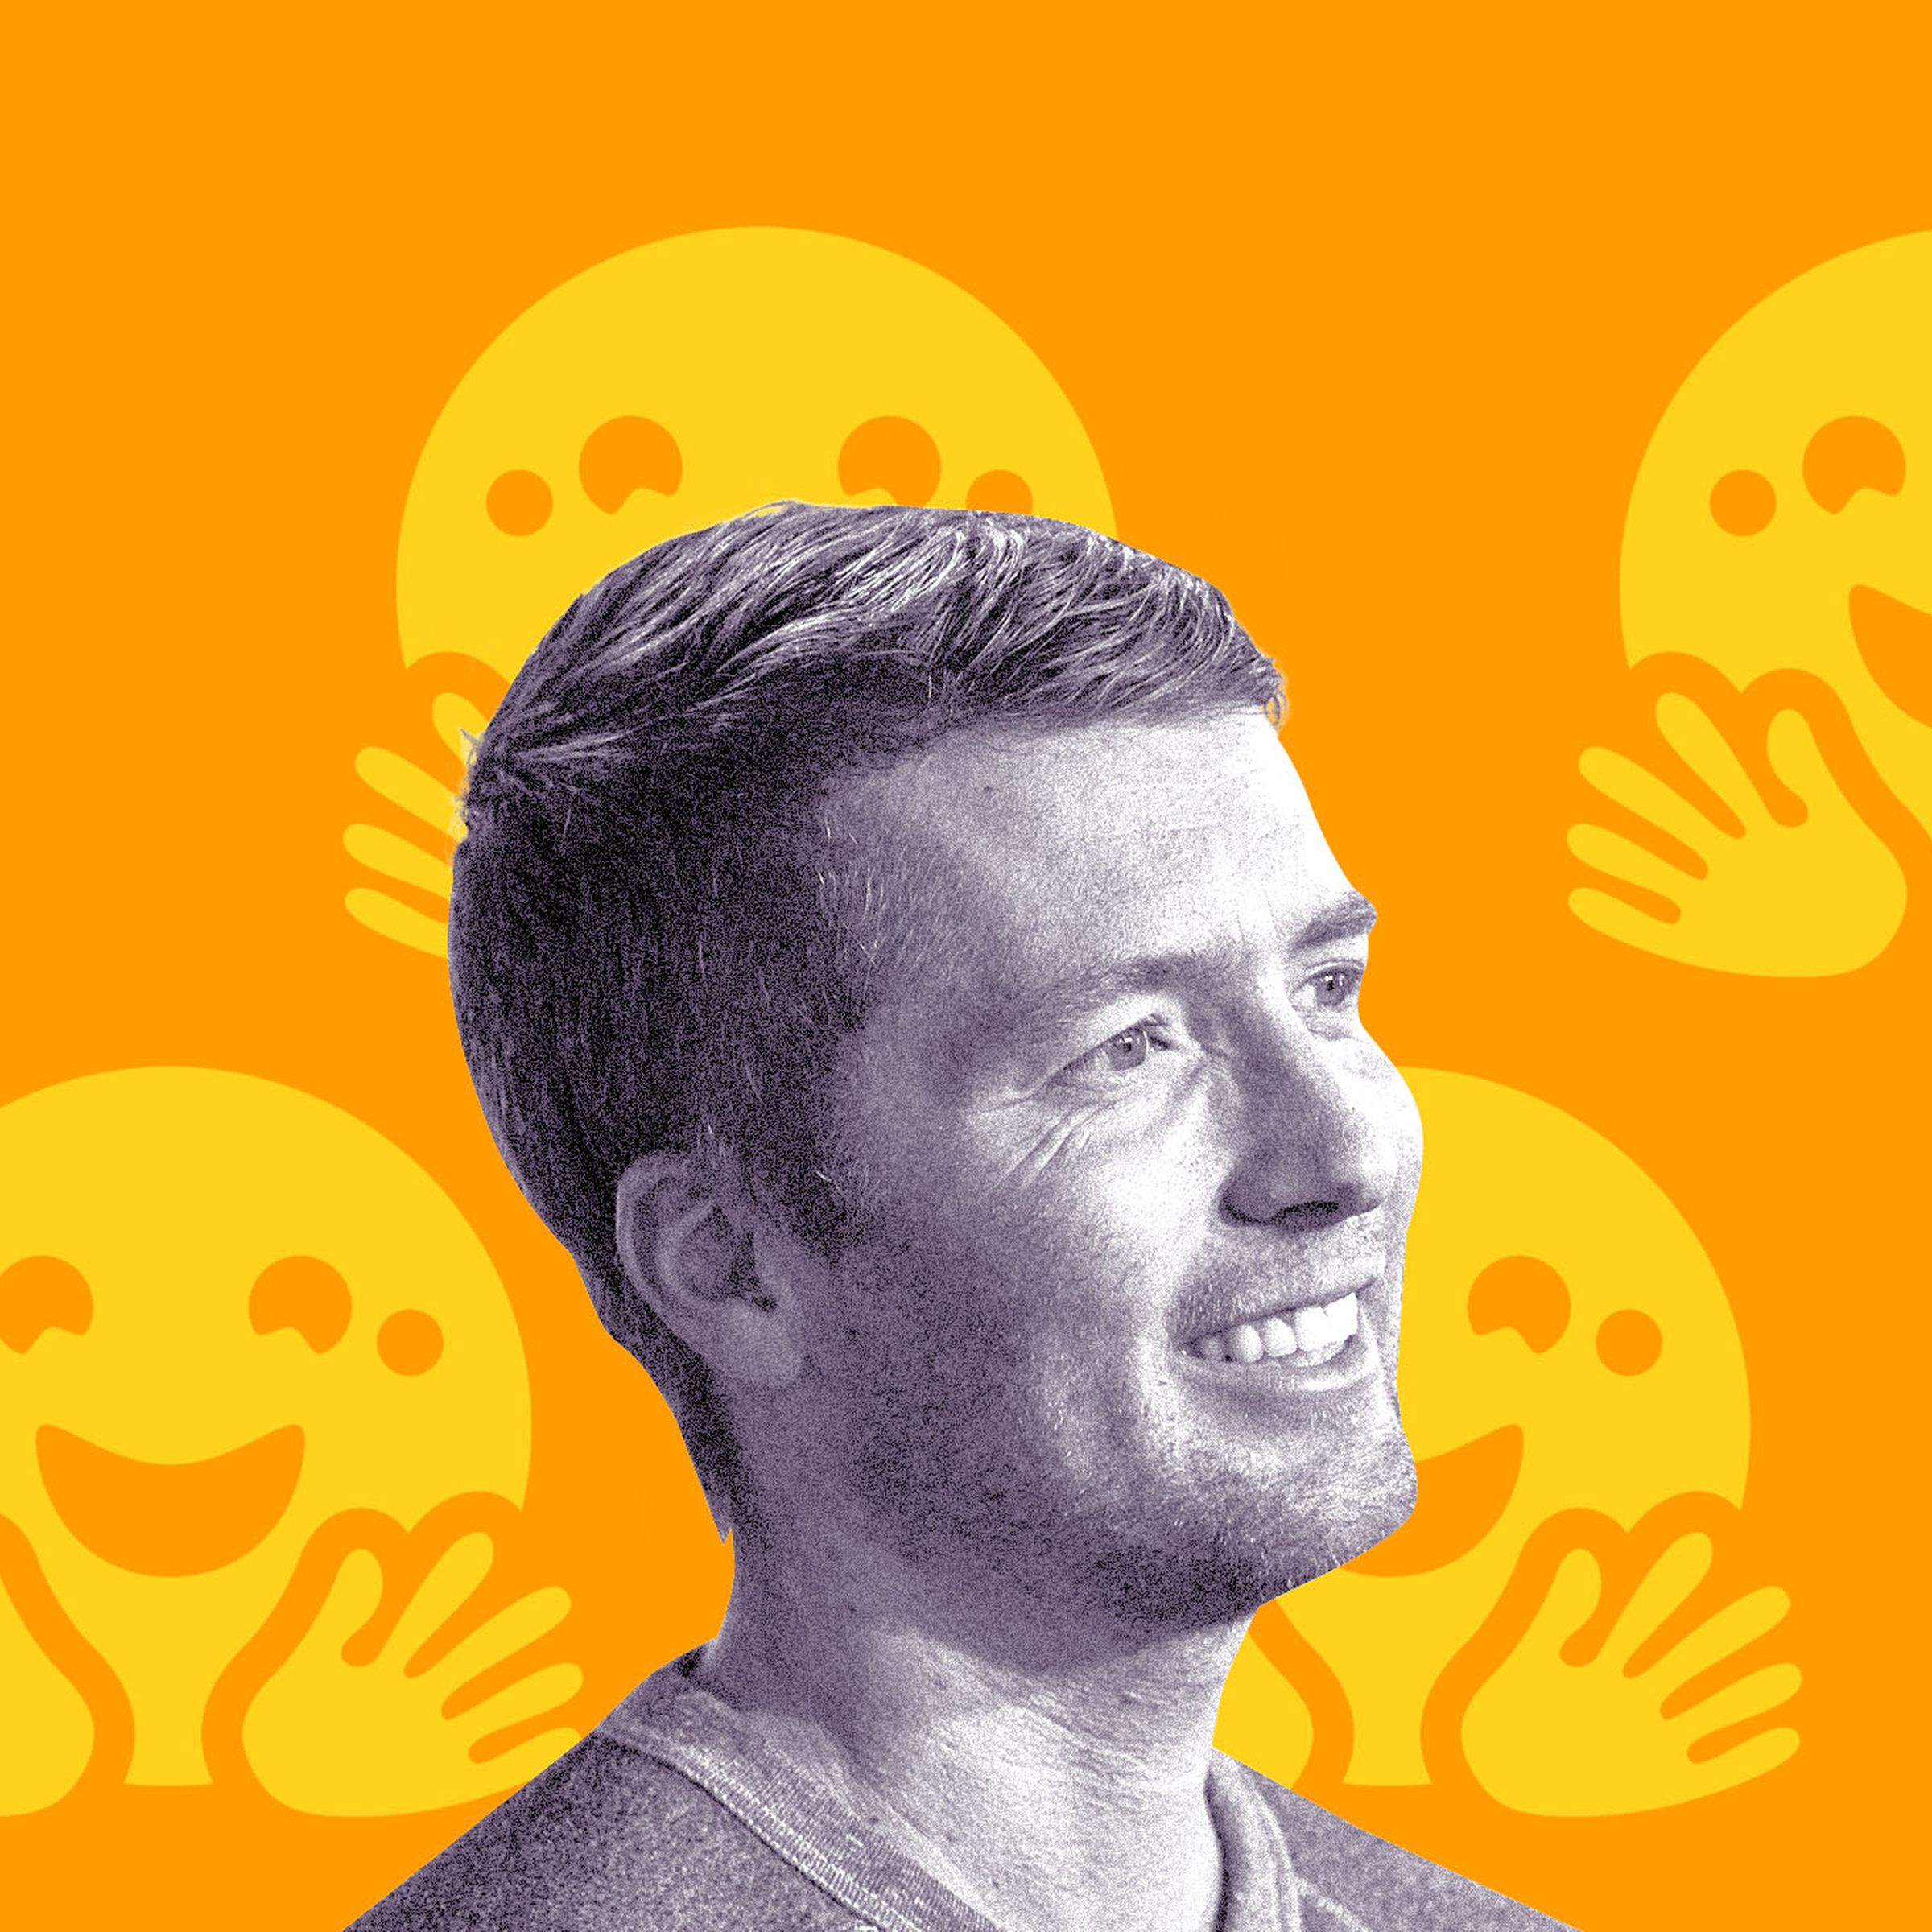 Photo illustration of Clément Delangue of Hugging Face in front of the Hugging Face logo.